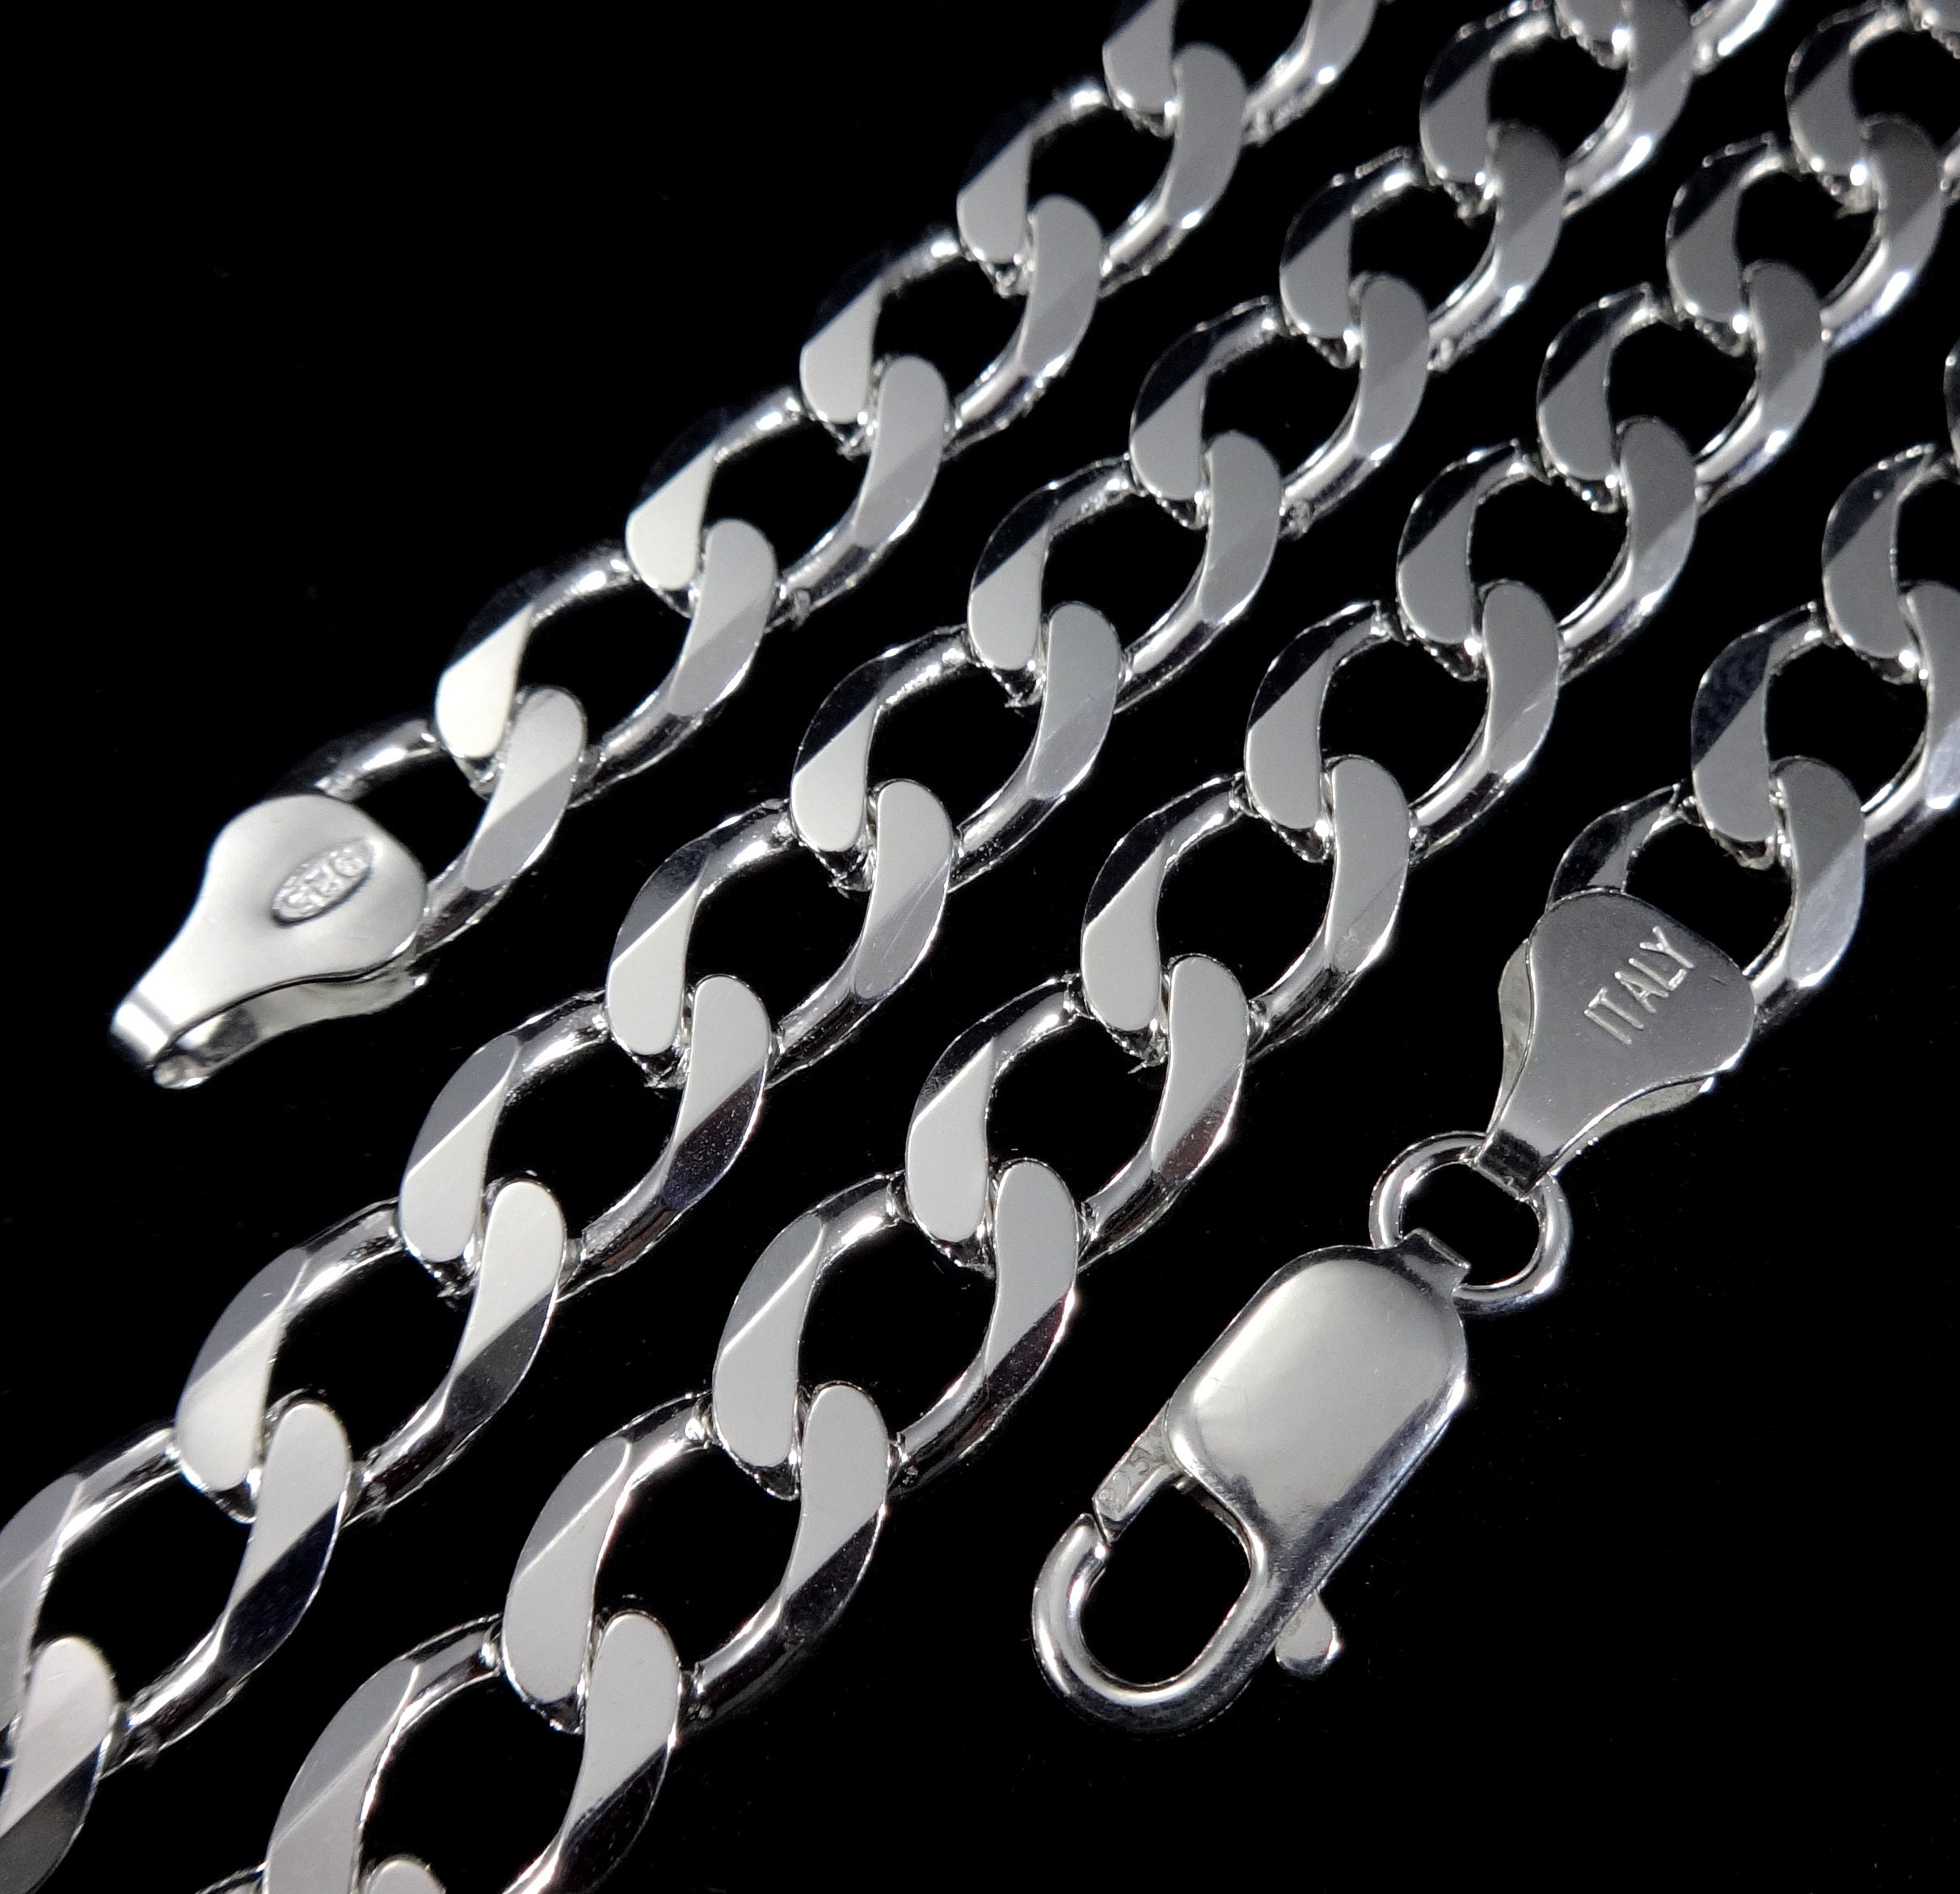 2MM Curb Chain .925 Solid Sterling Silver Sizes 7-30